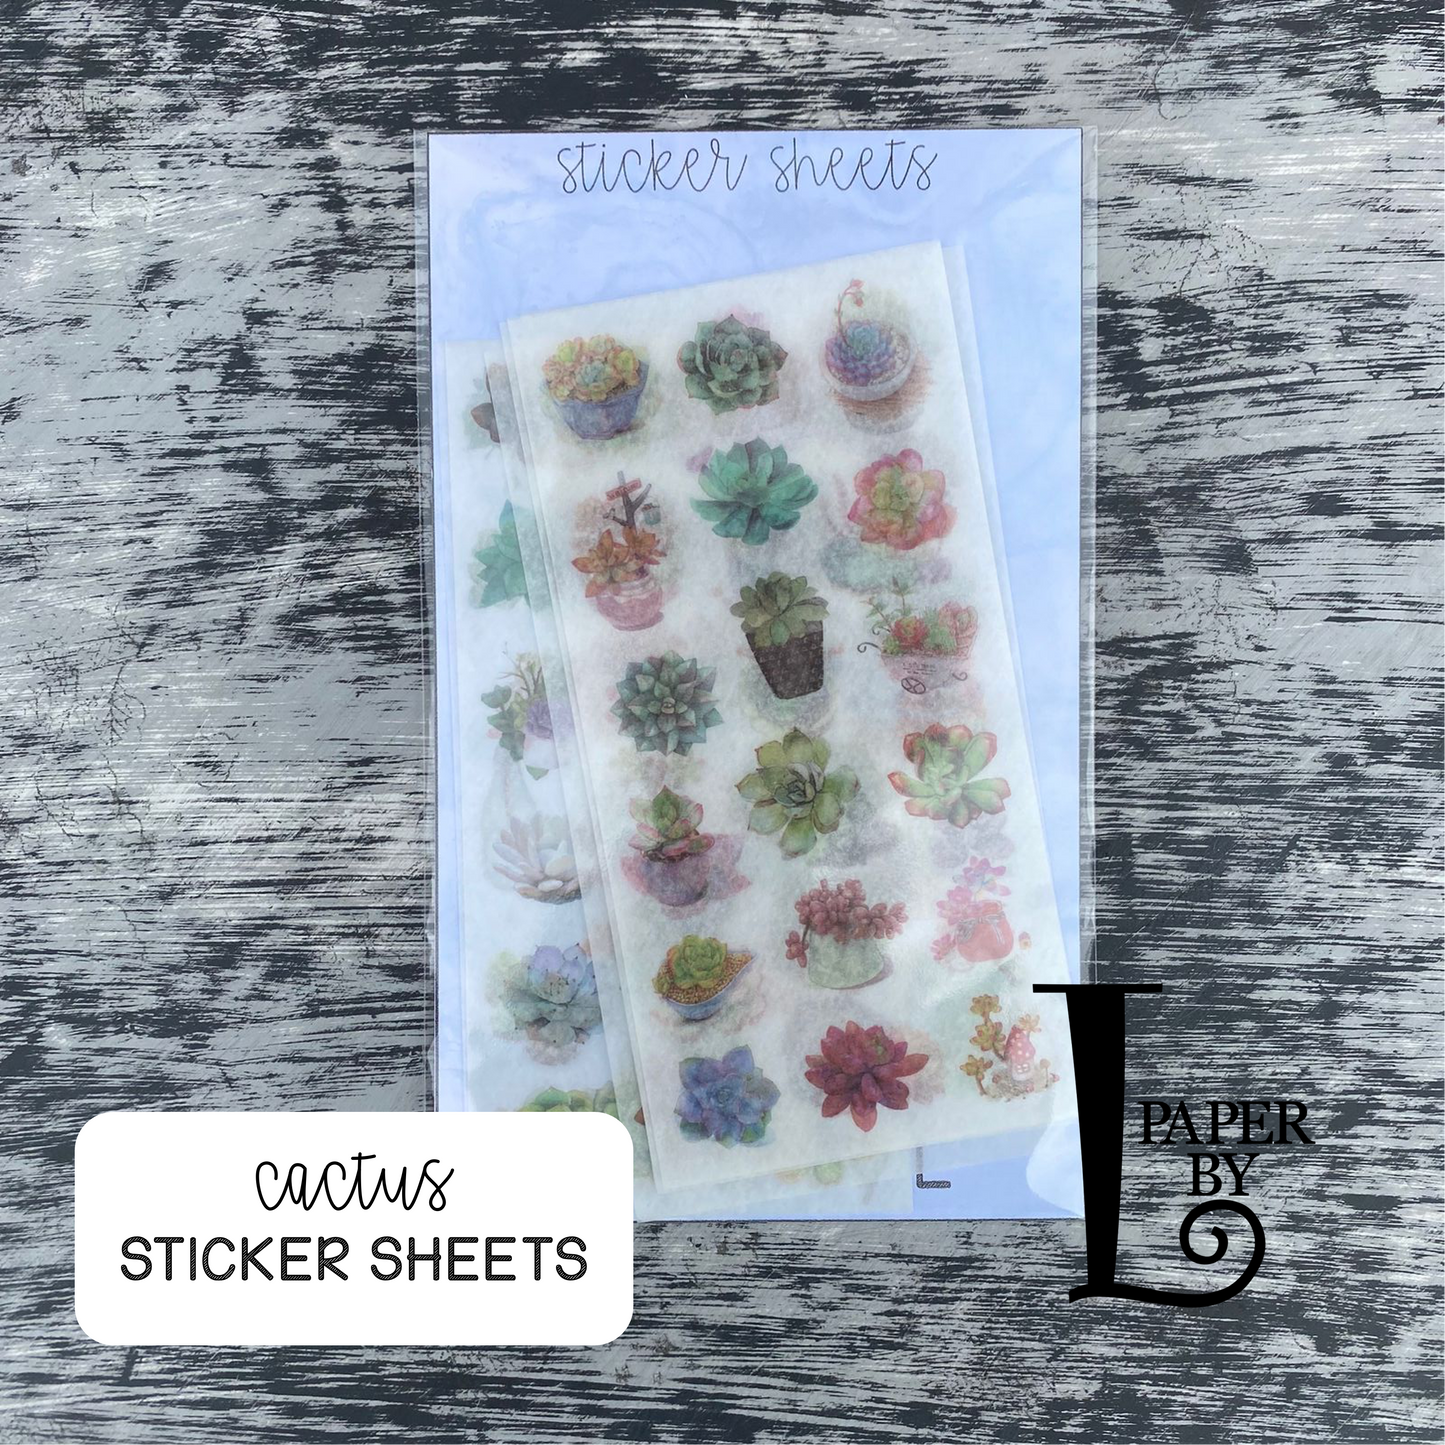 Sticker Sheets - Paper by L